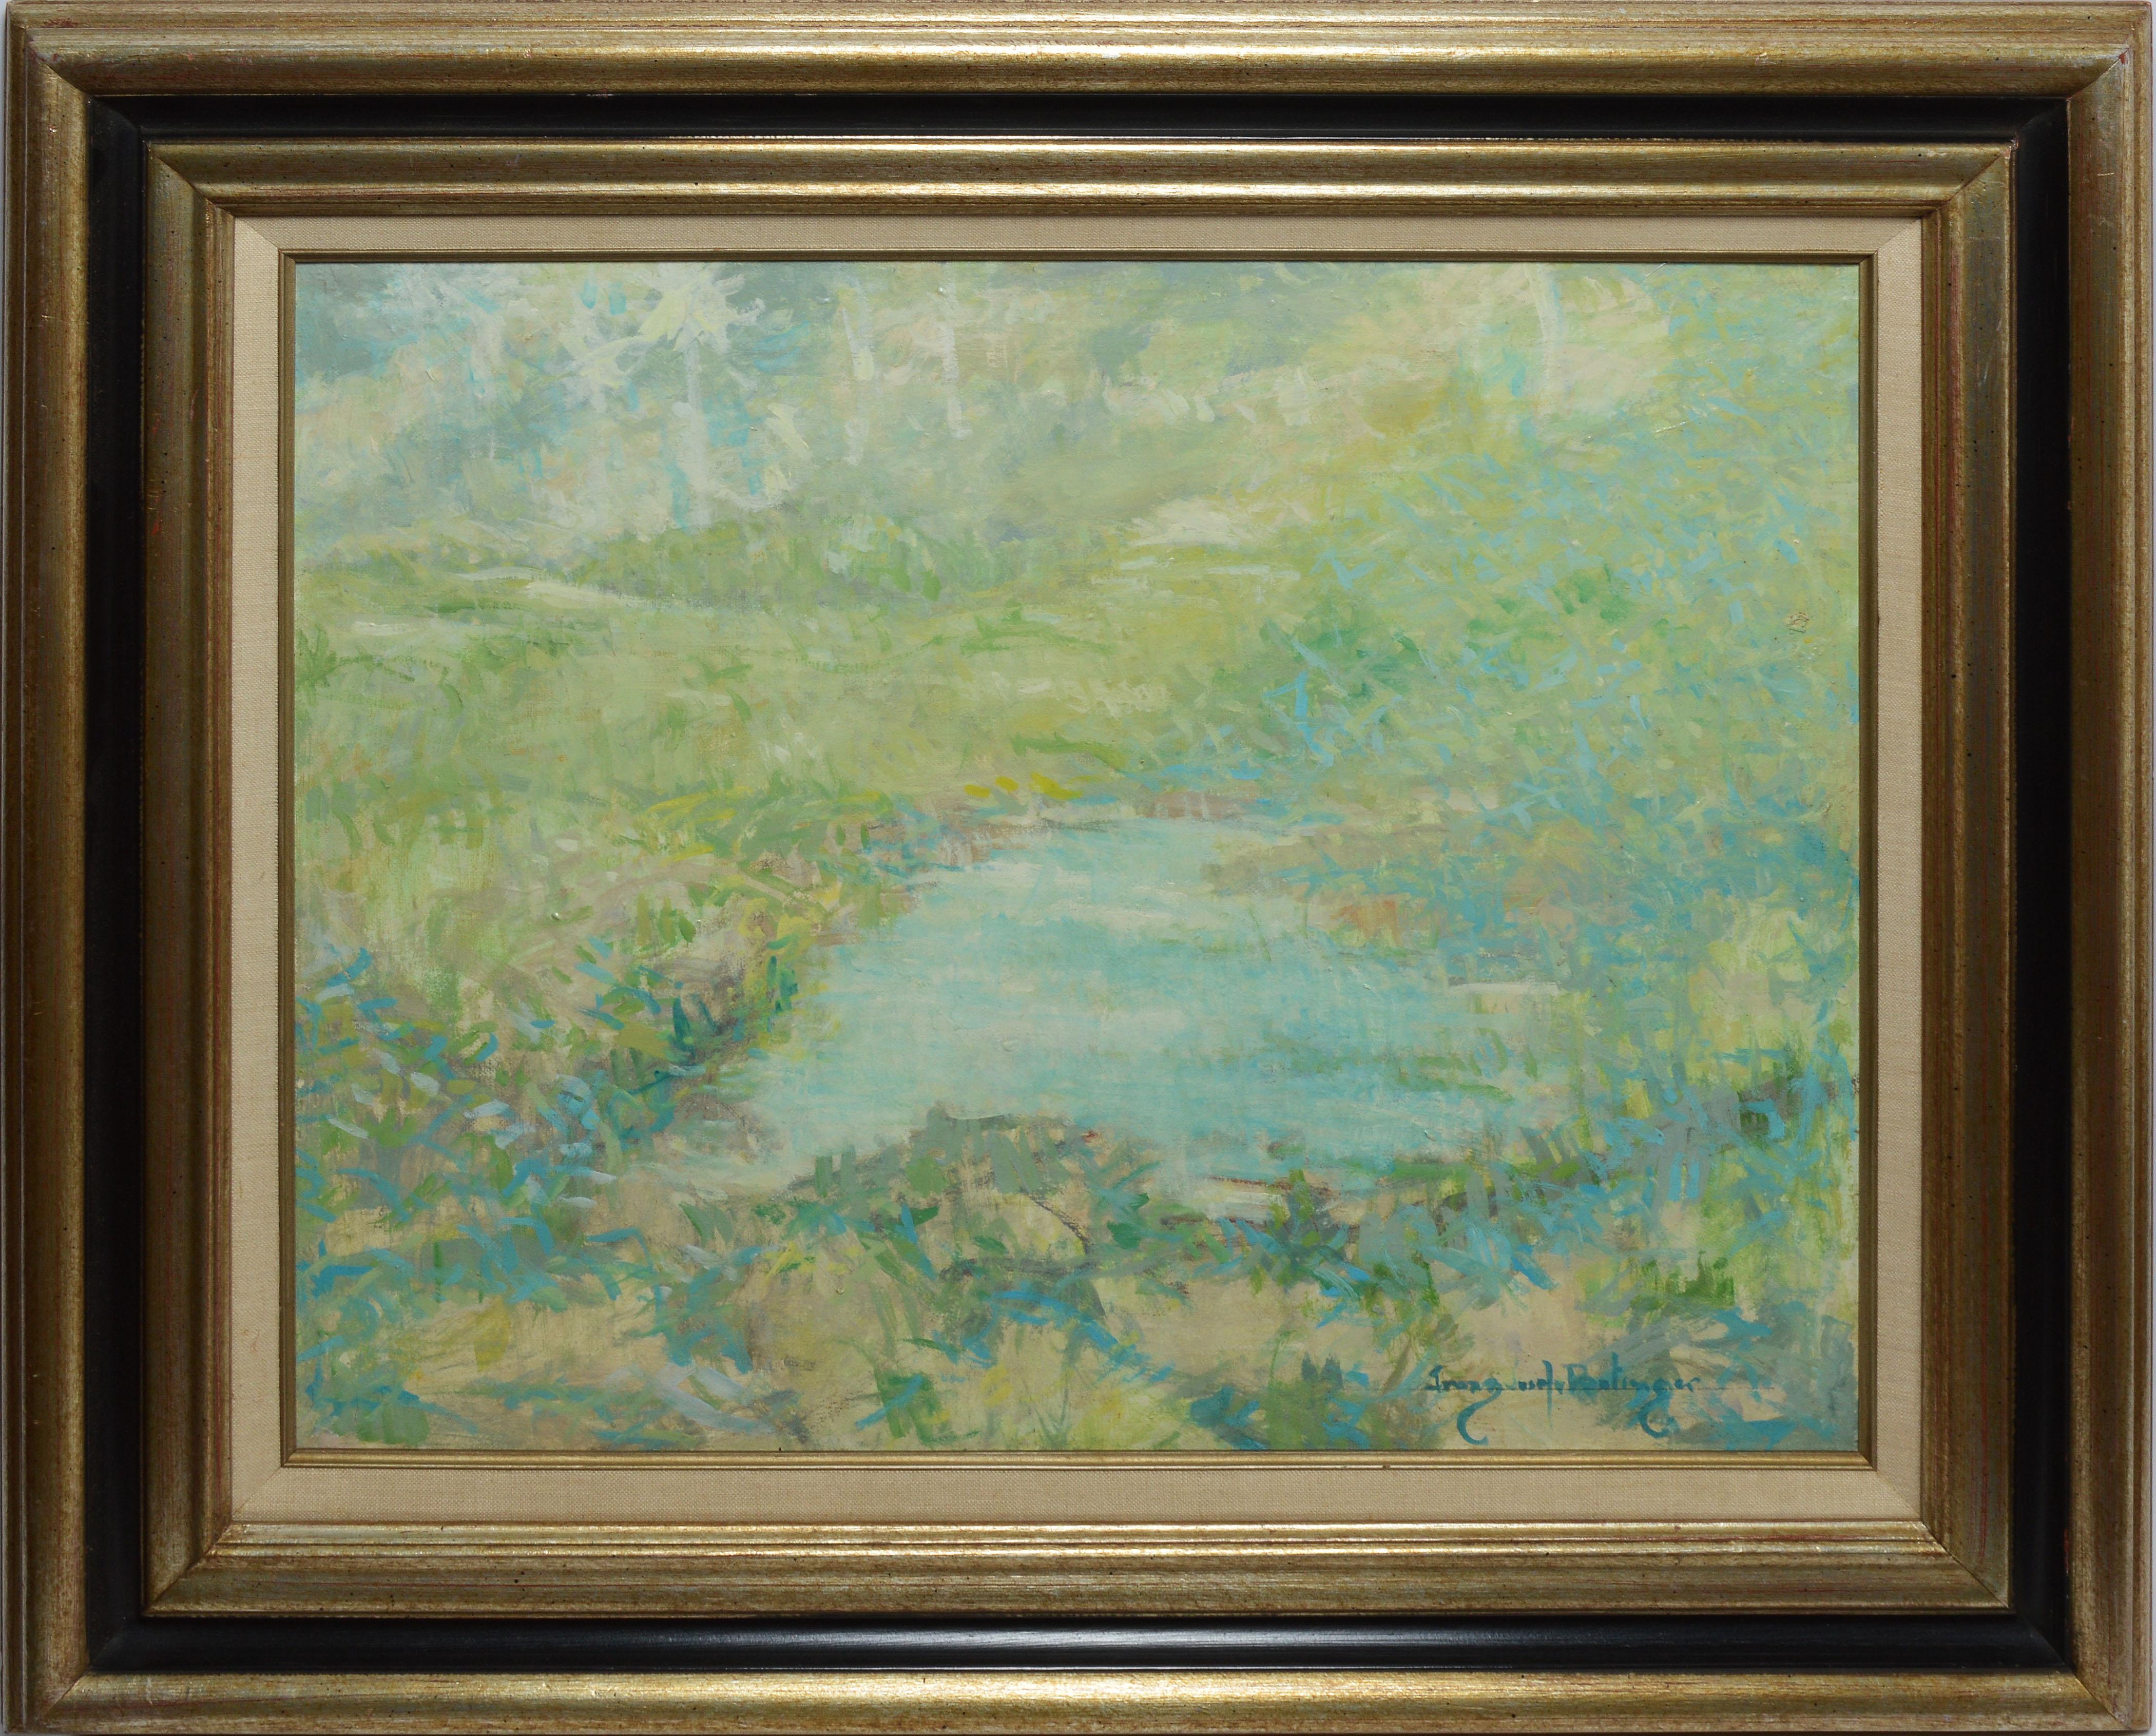 Impressionist view of a Florida landscape by Franz Josef Bolinger  (1903 - 1986).  Oil on canvas, circa 1930.  Displayed in a silver and black impressionist frame.  Image size 24"L x 20"H, overall 32"L x 28"H.